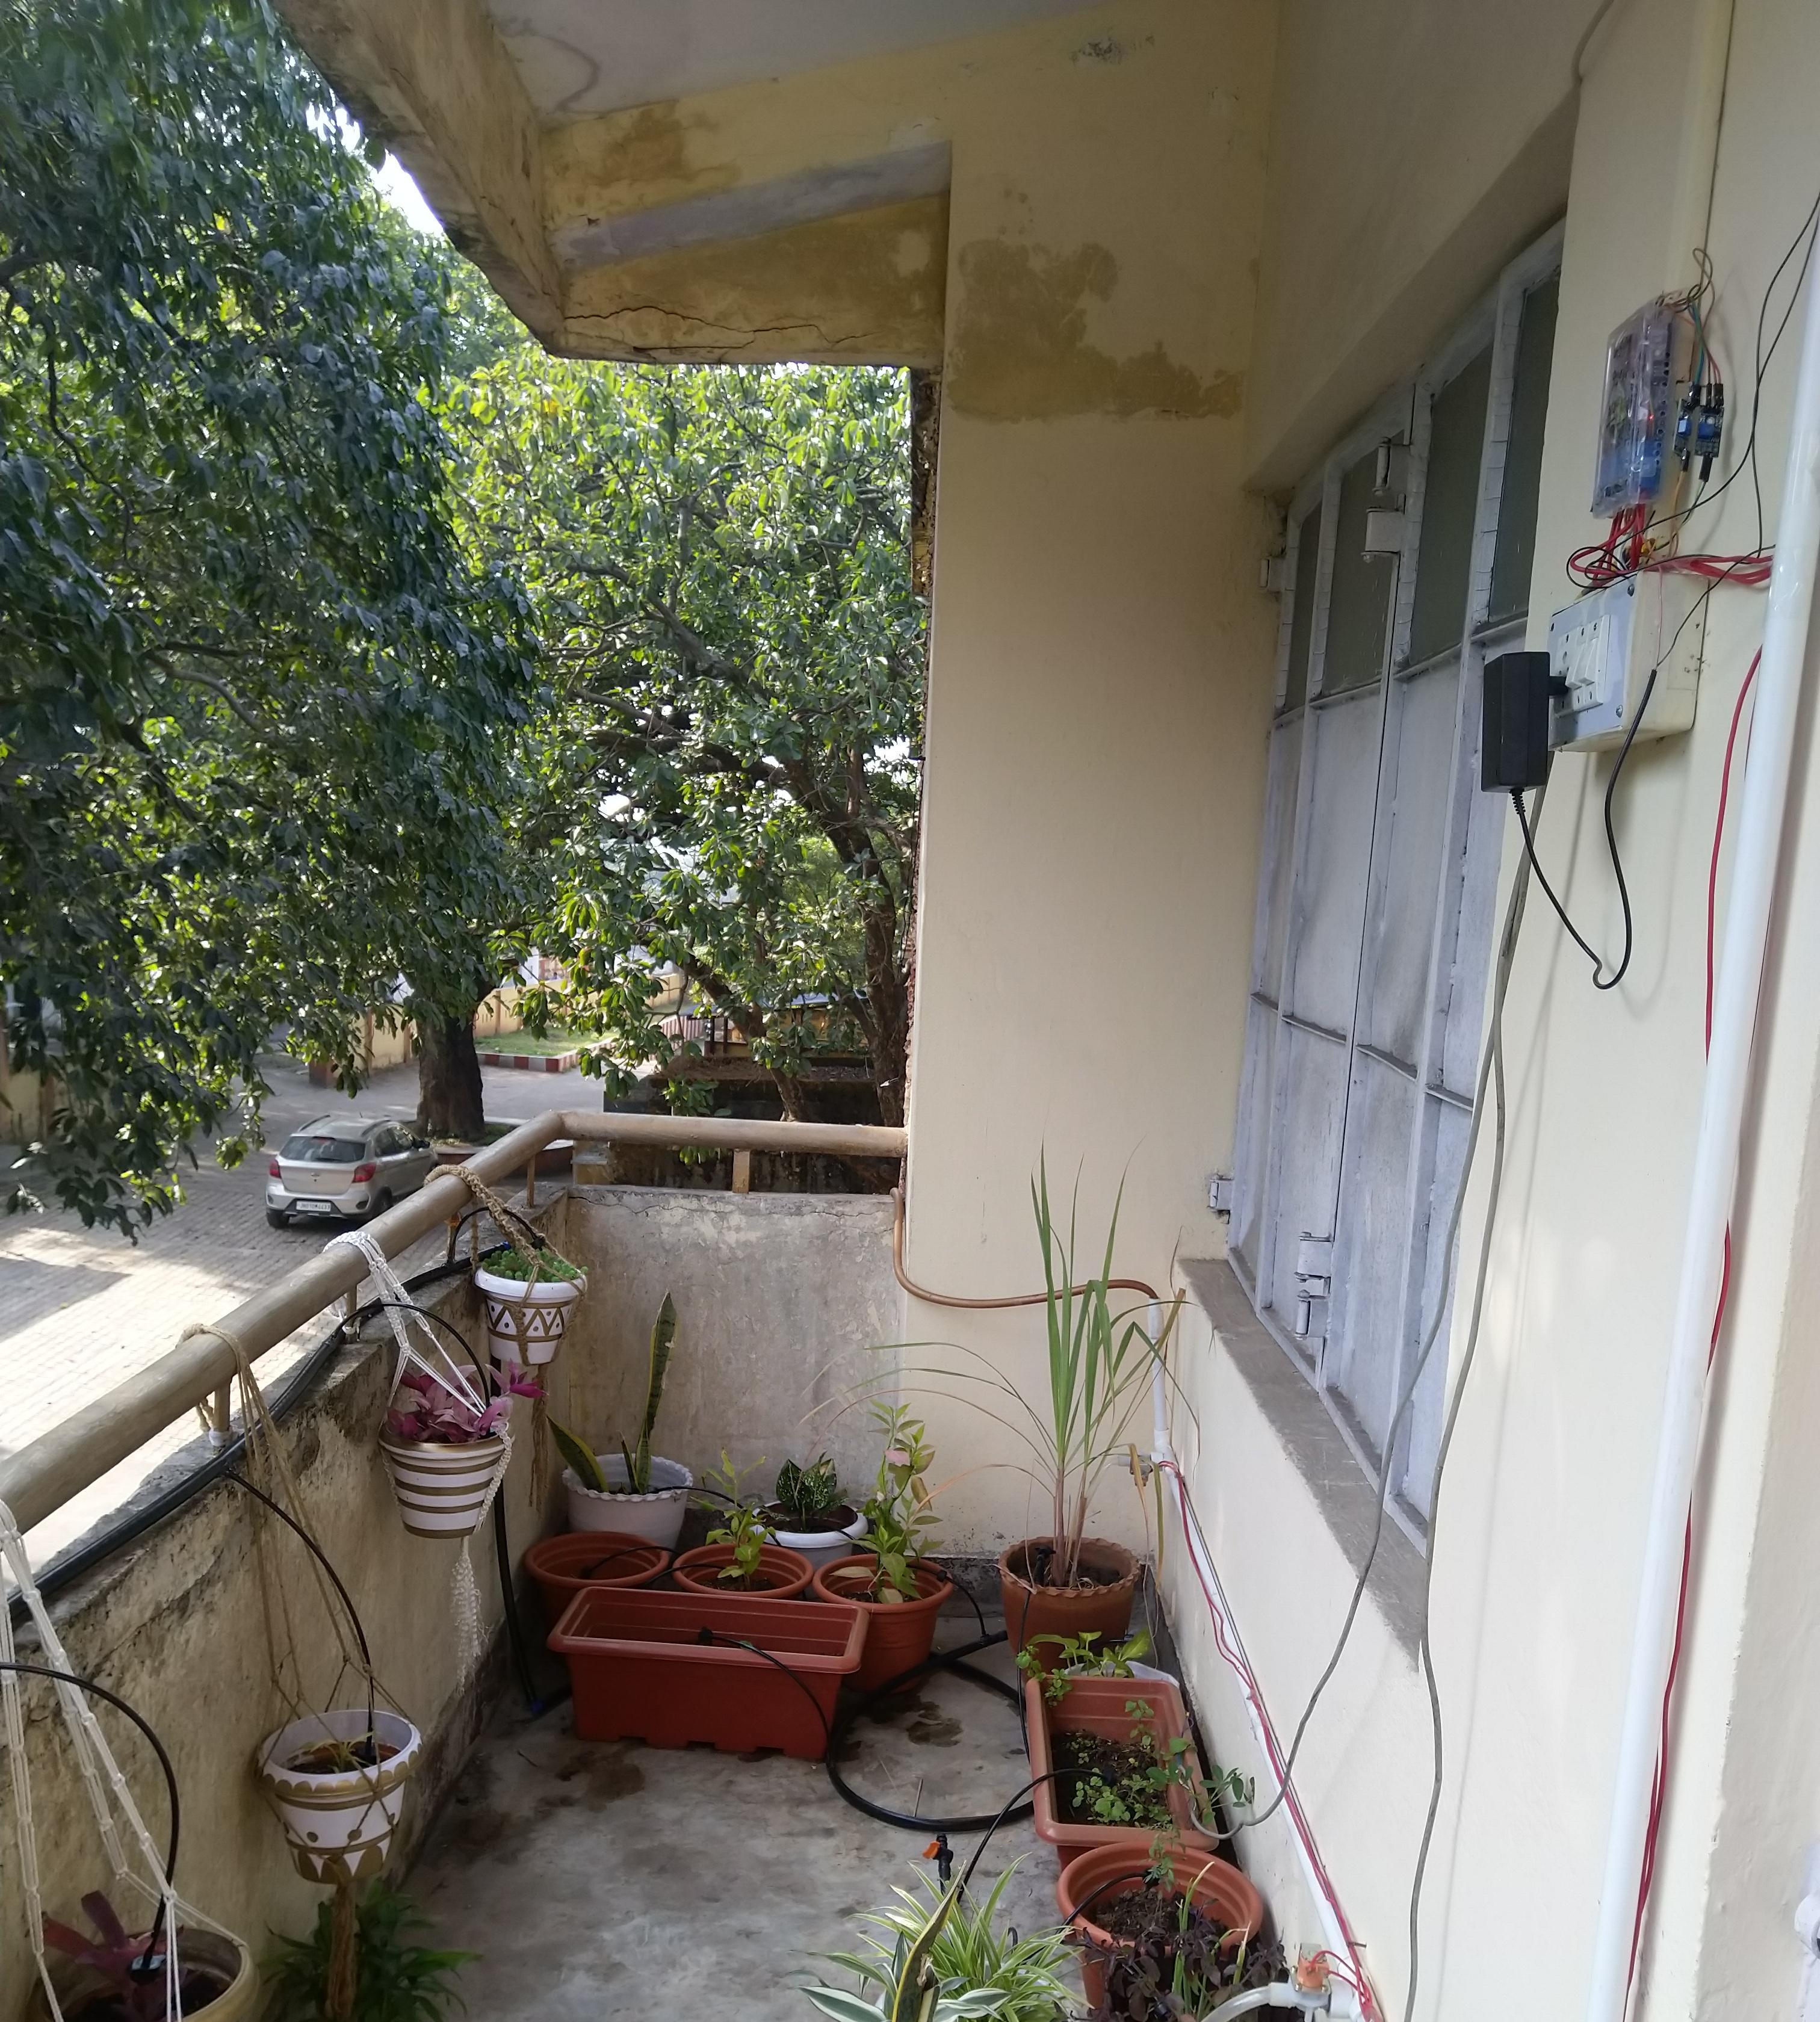 Soil Moisture Feedback Controlled Internet Connected Drip Irrigation System (ESP32 and Blynk)